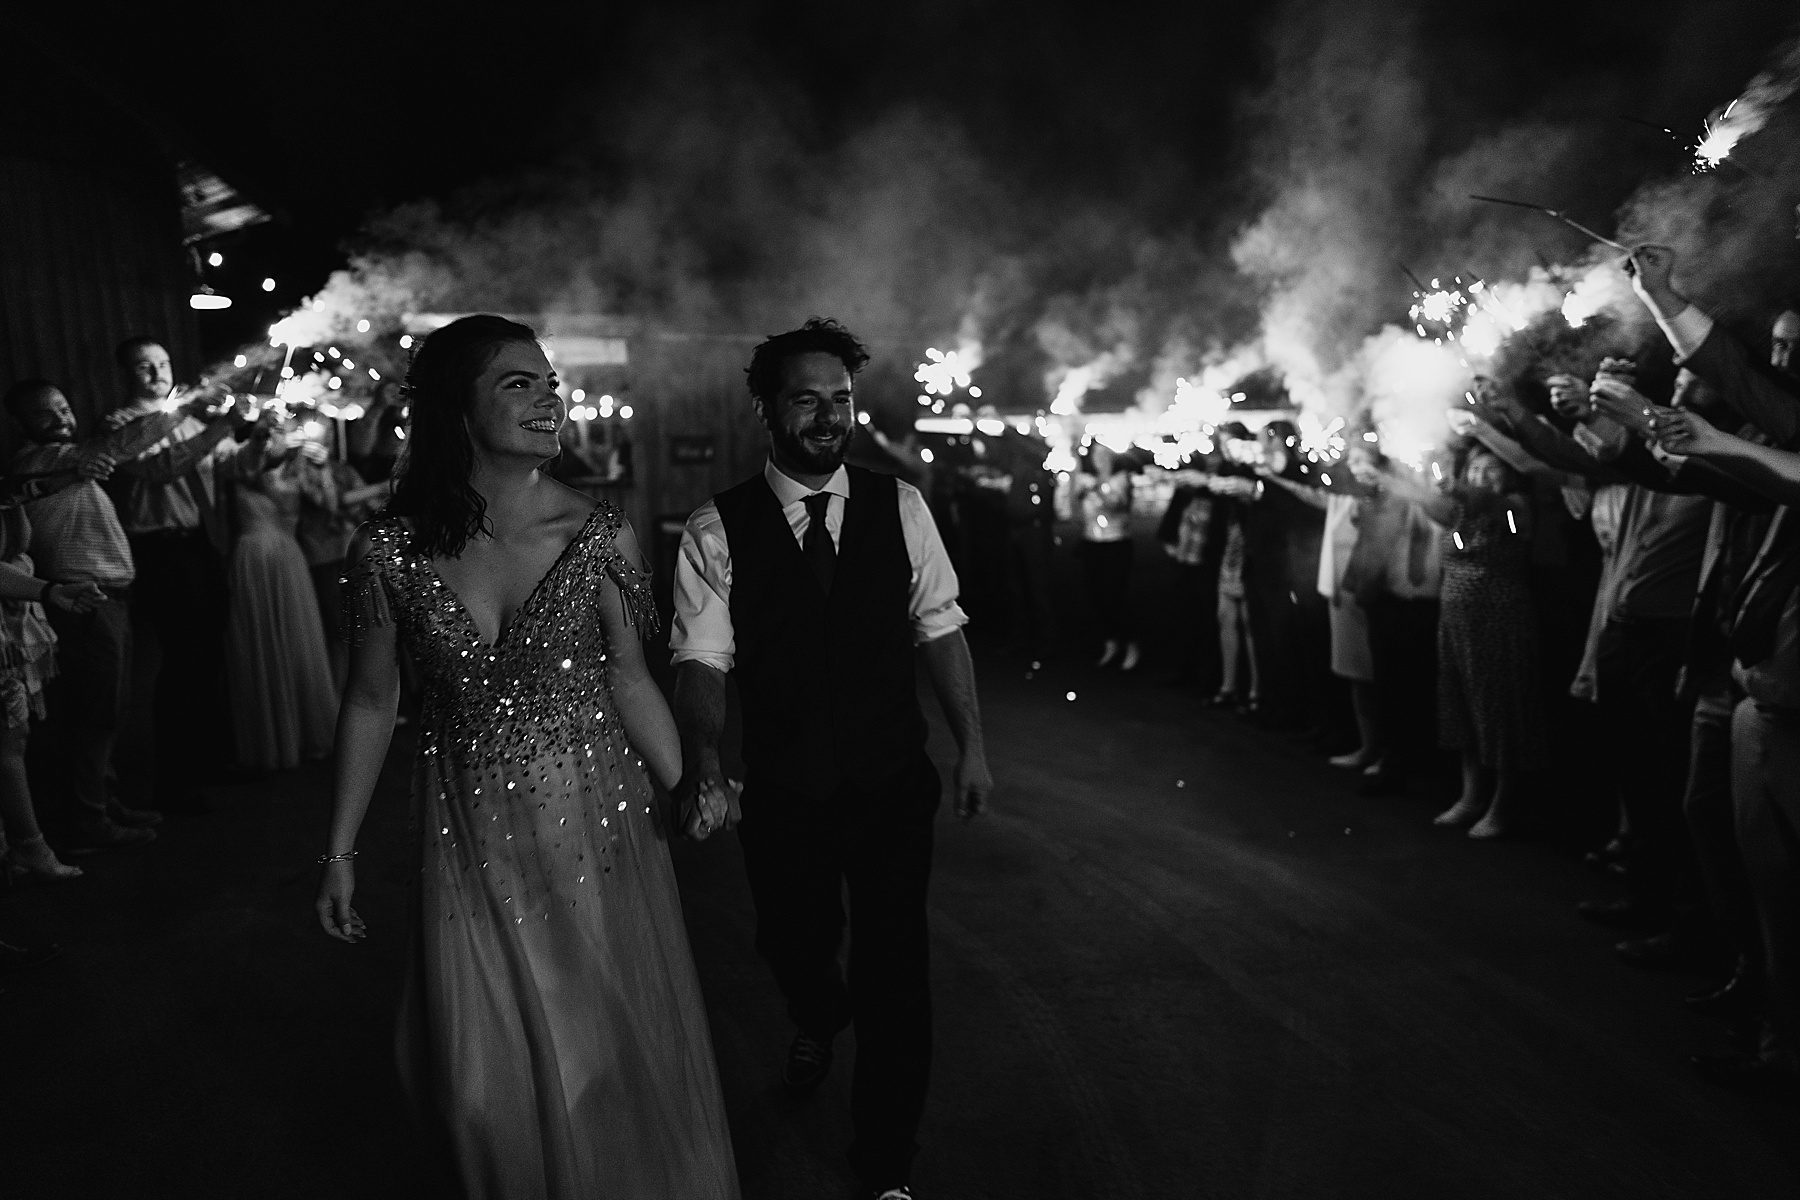 sparkler exit at wedding with bride and groom